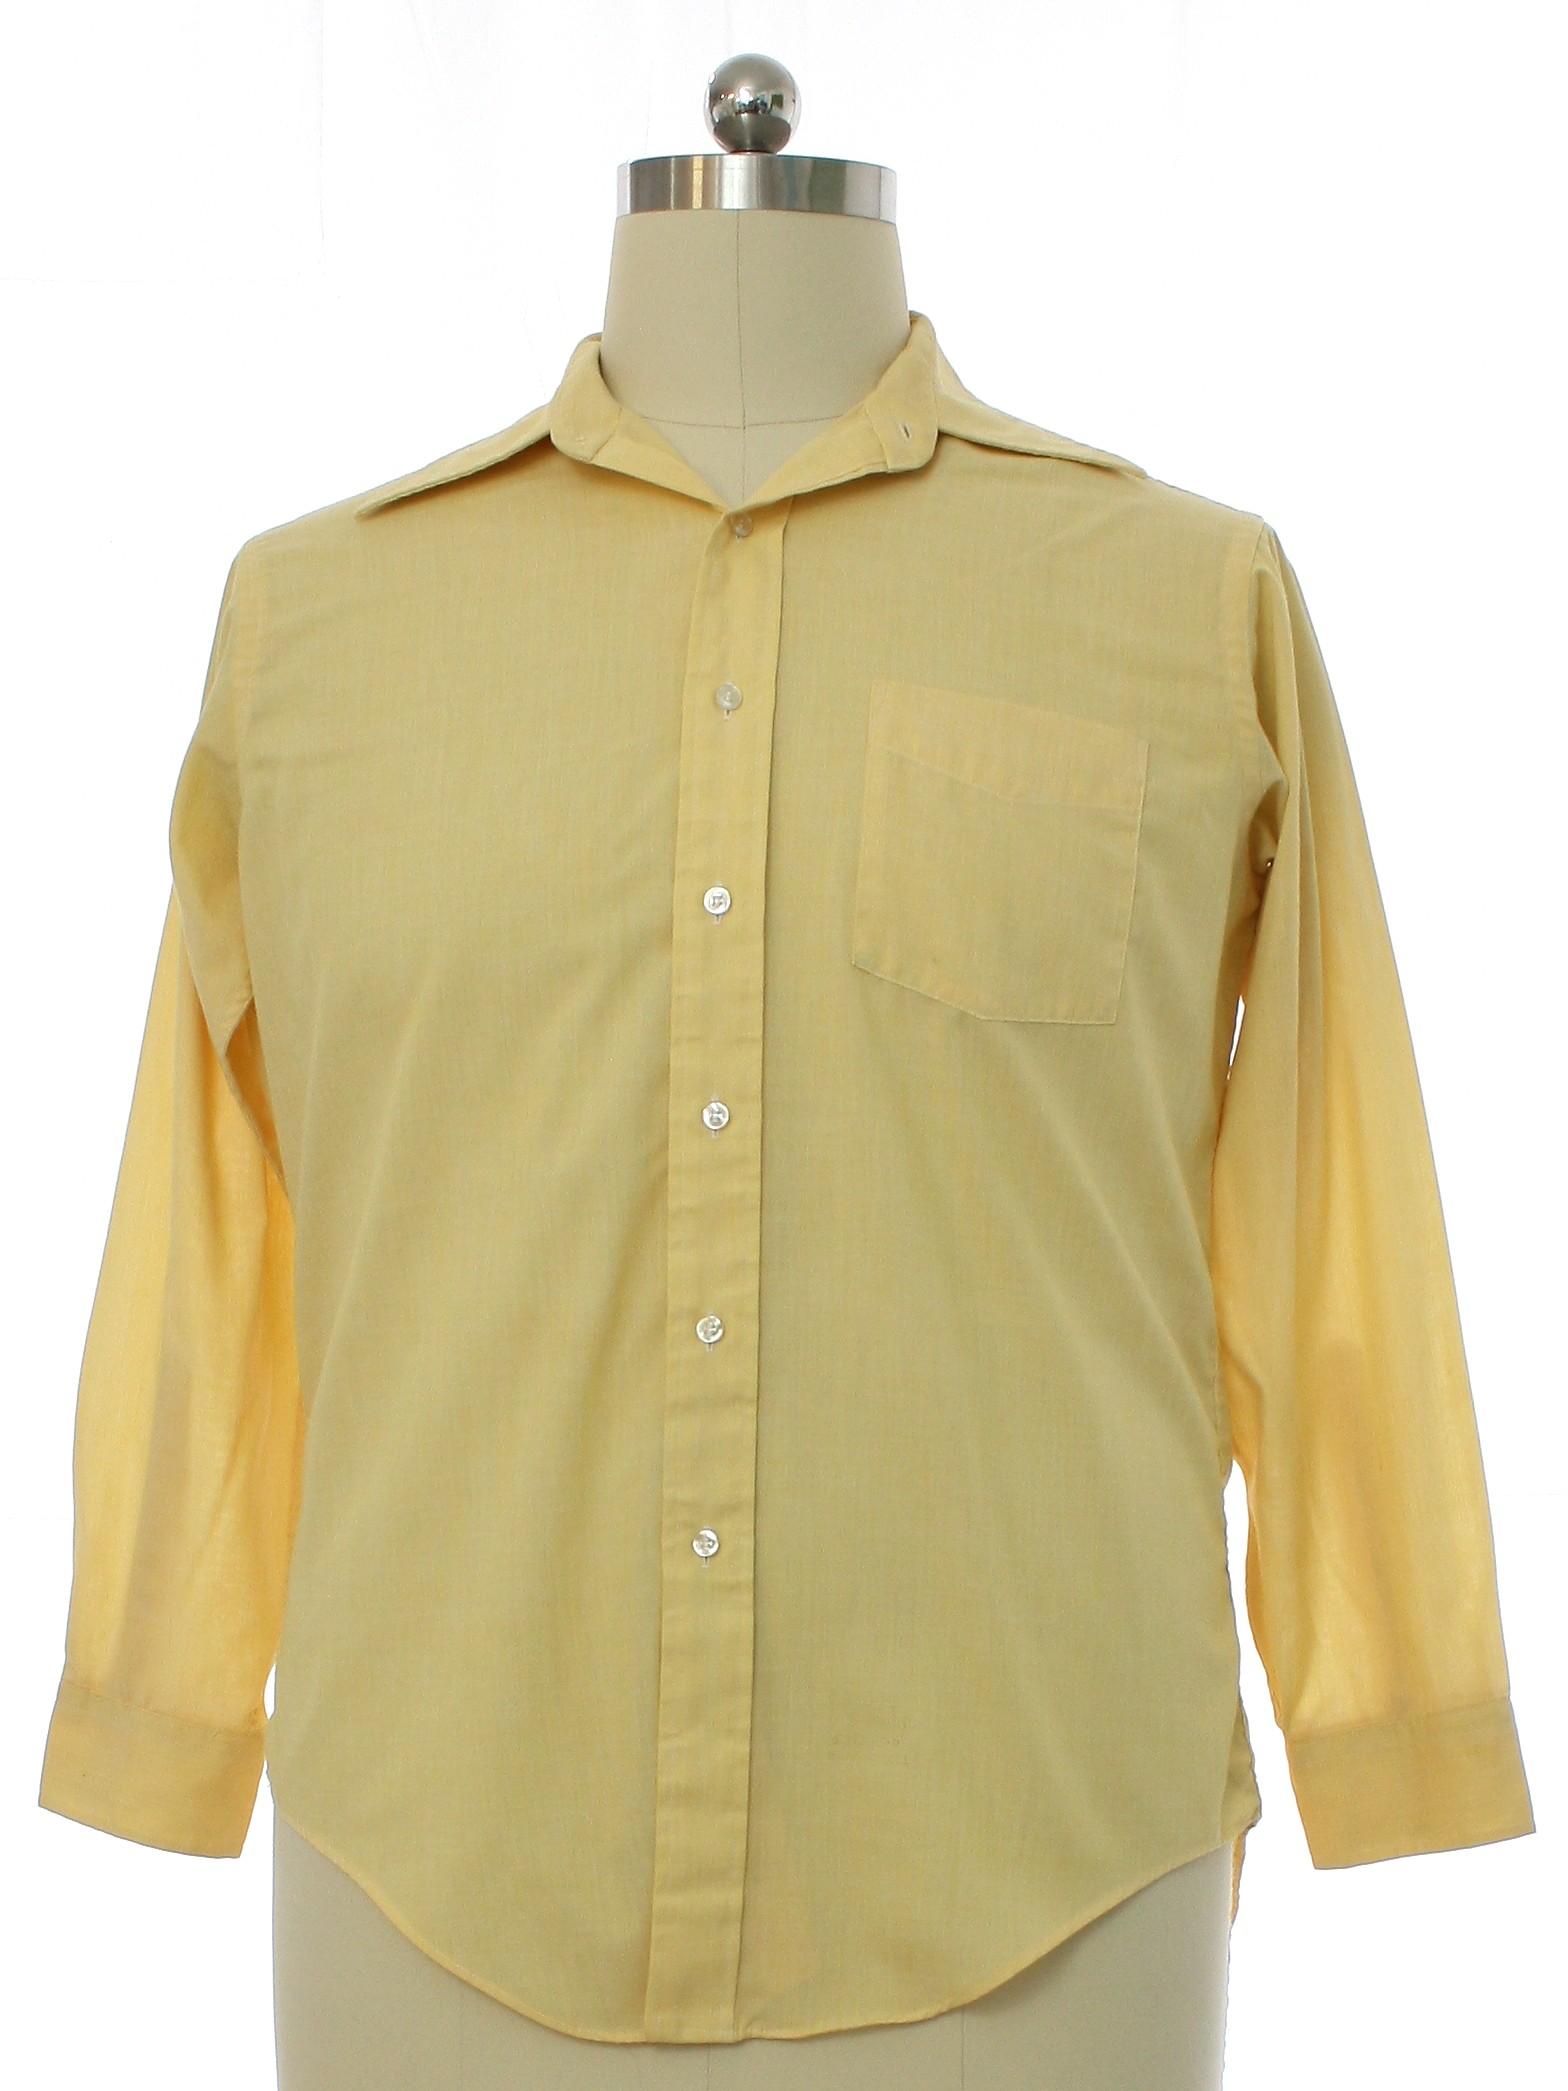 1960's Retro Shirt: Late 60s or early 70s -Iveys- Mens maze polyester ...